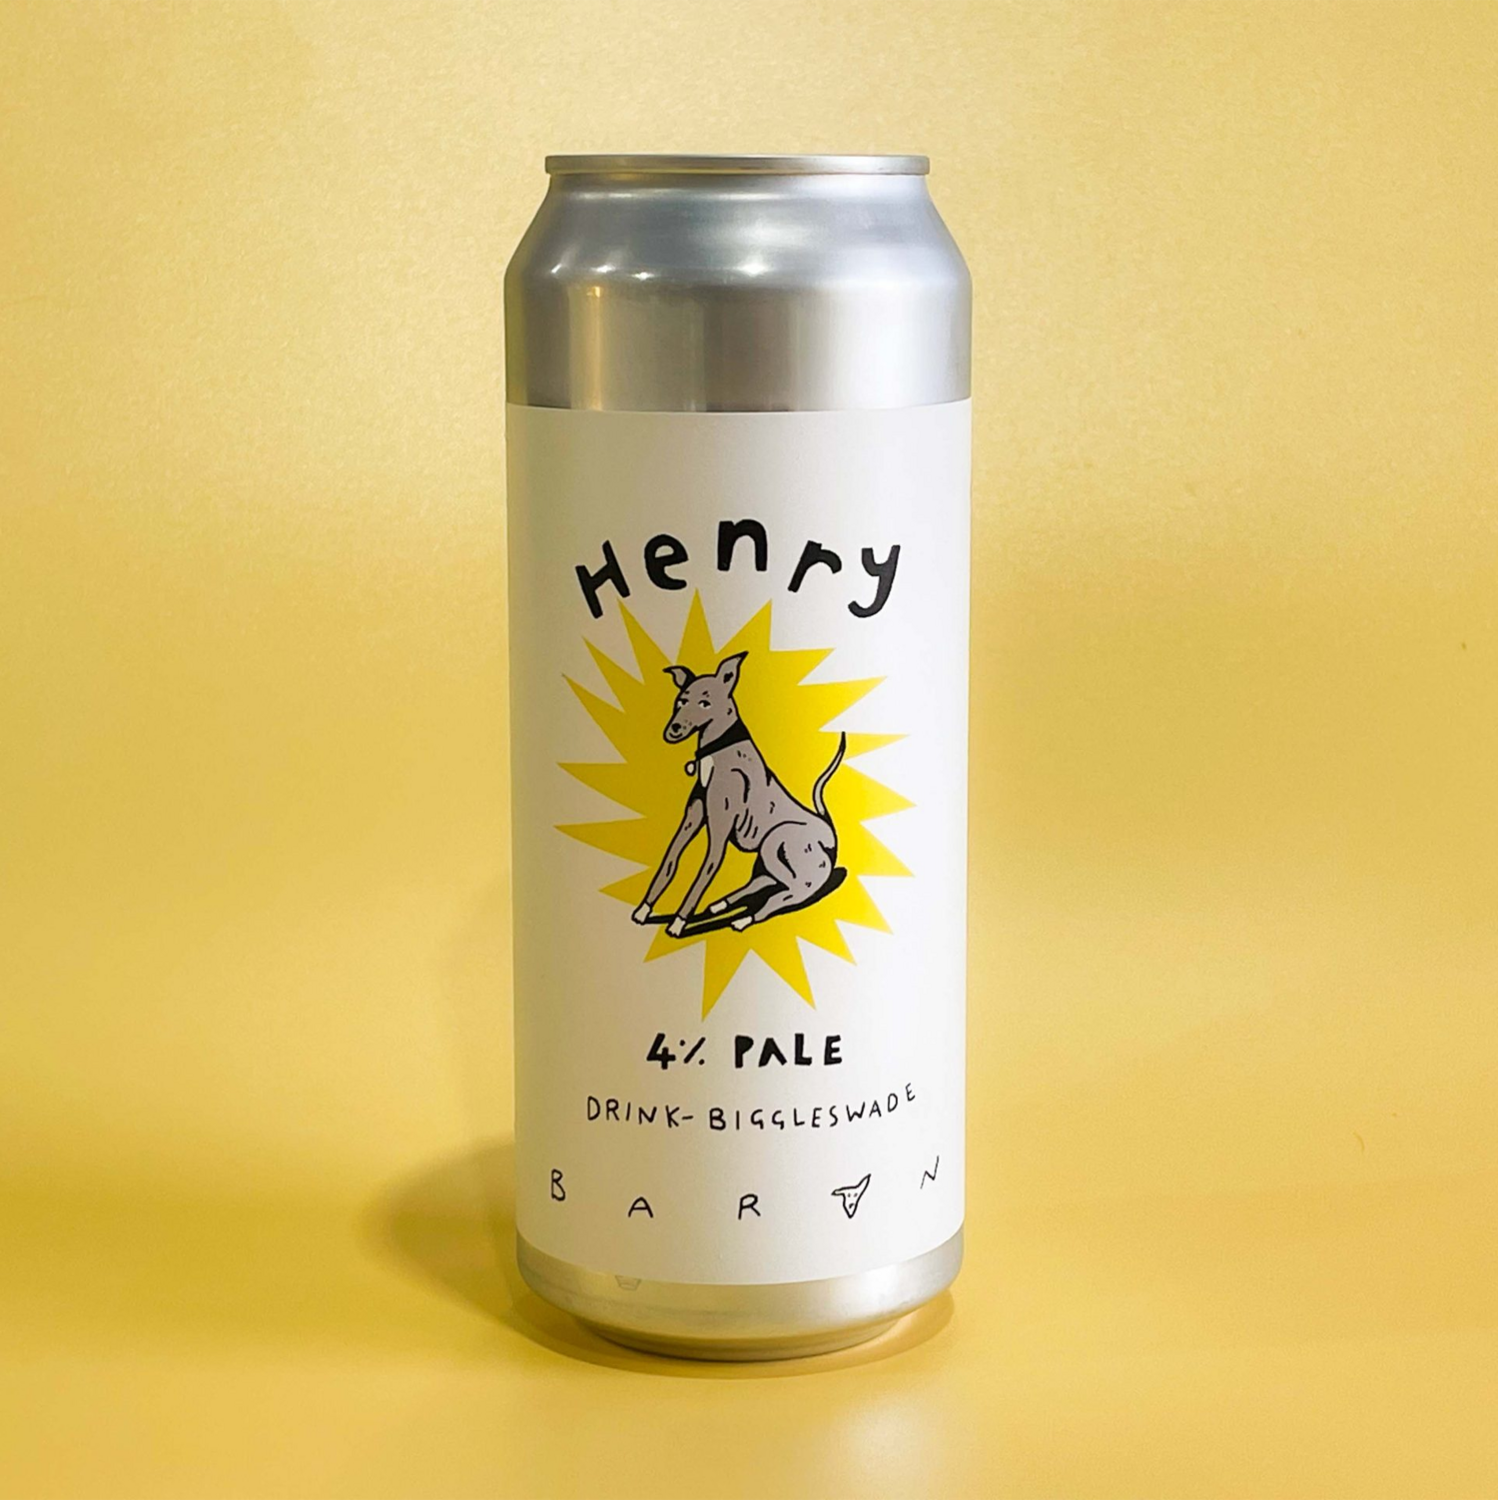 Baron x Drink Biggleswade Henry Pale Ale